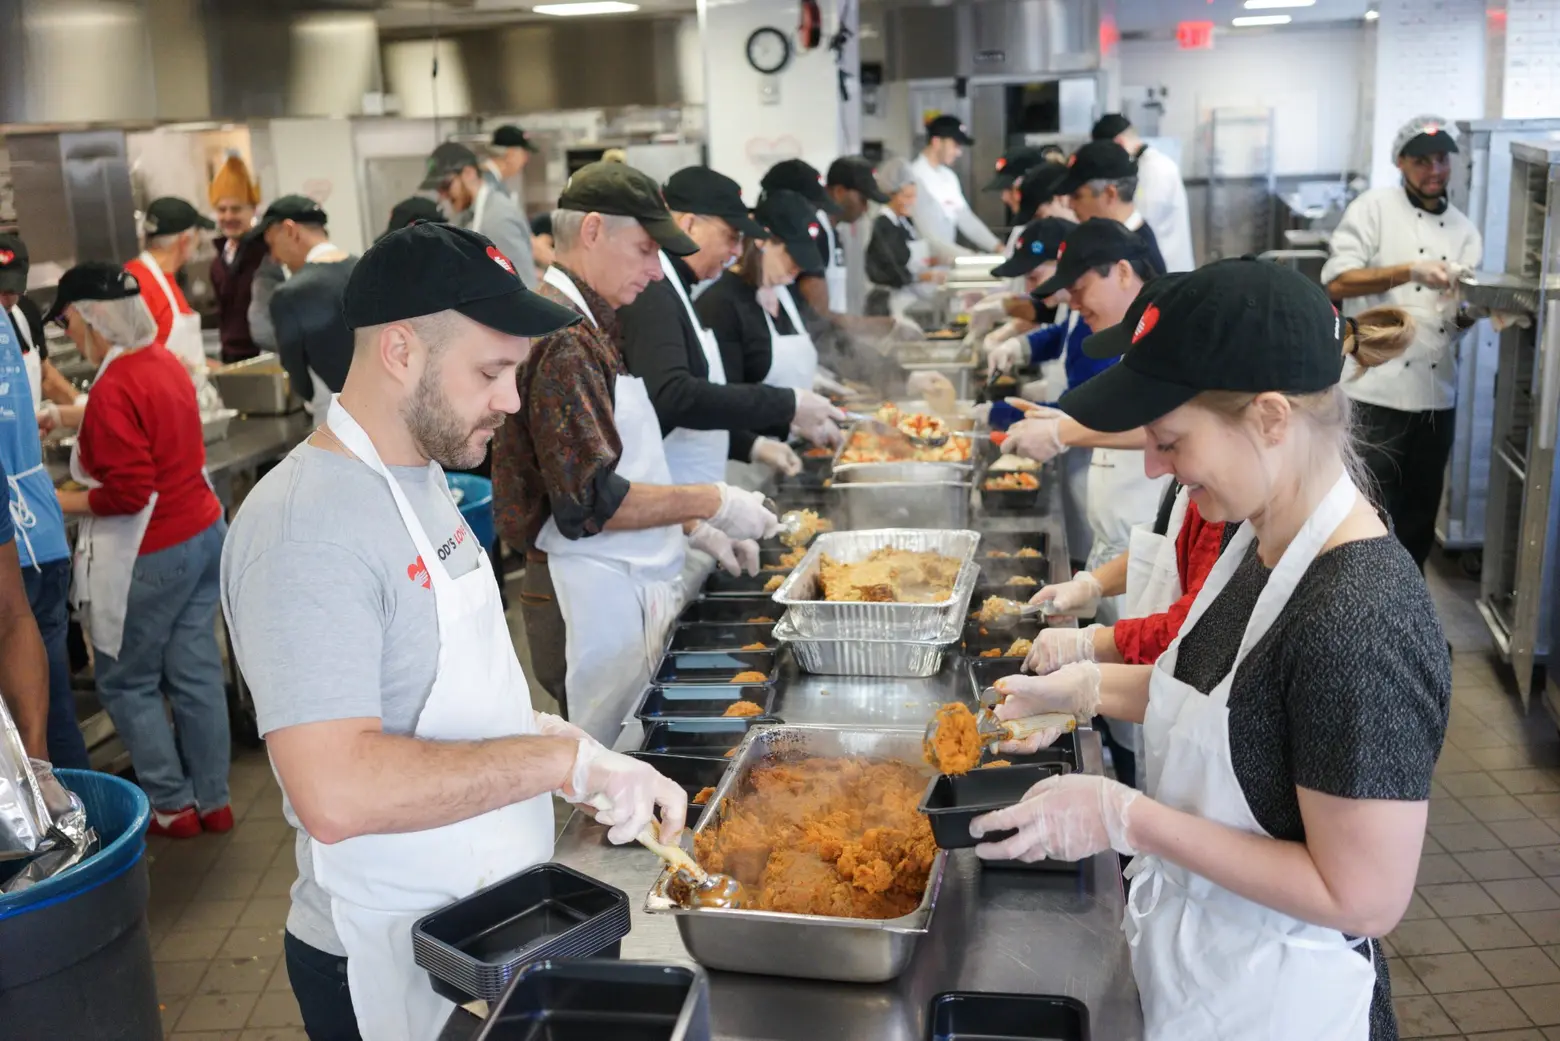 13 places to volunteer in NYC this holiday season